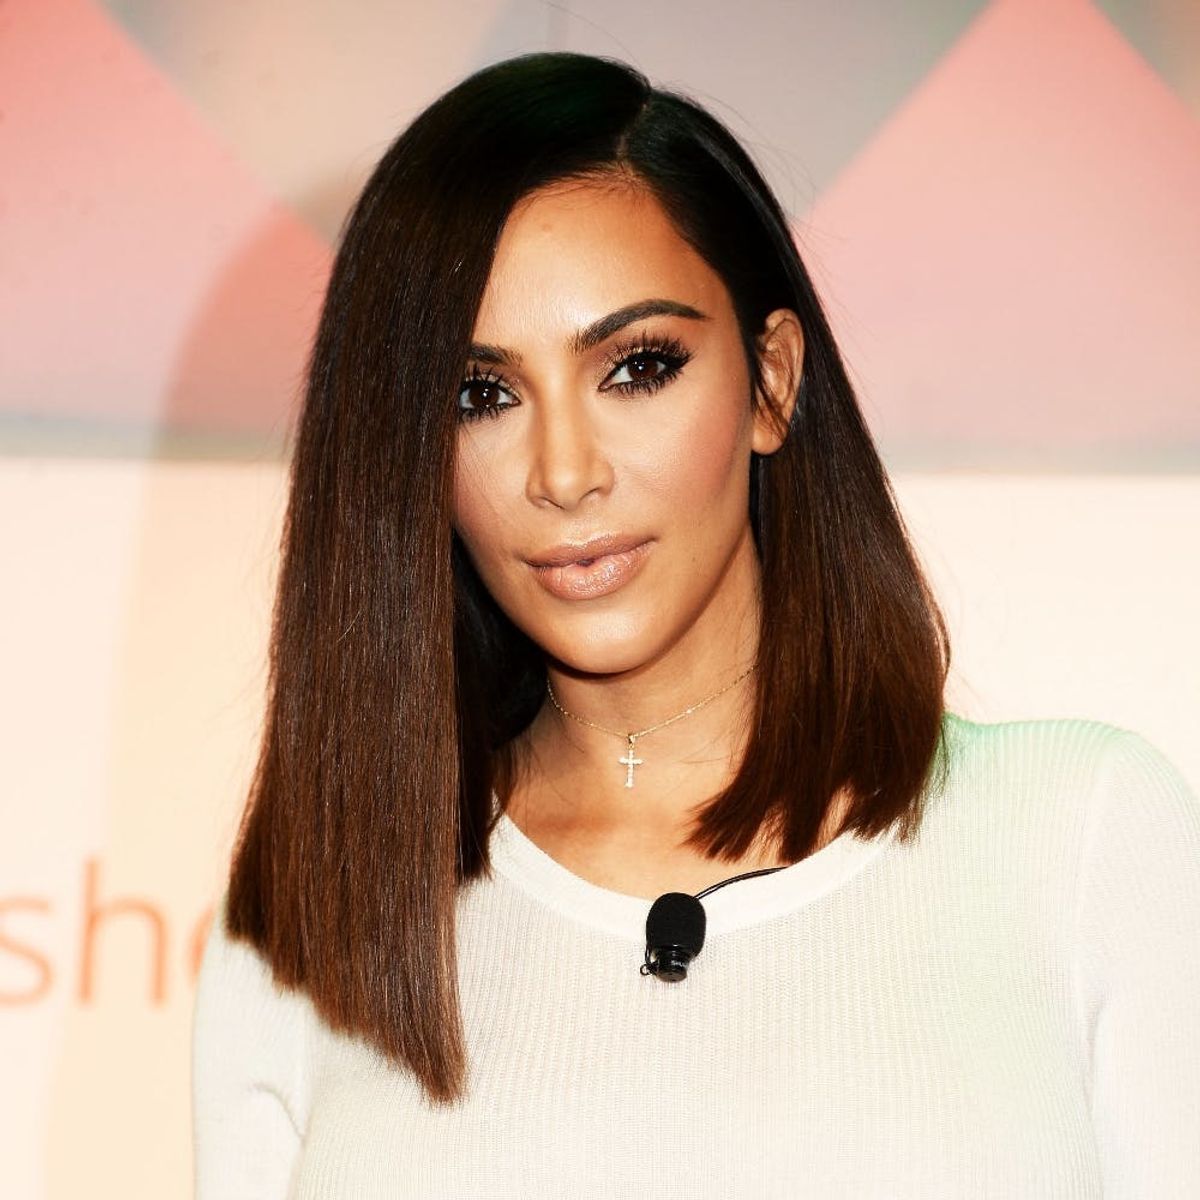 Kim Kardashian Reveals She Gets Butt Injections (and It’s NOT Why You’d Think)